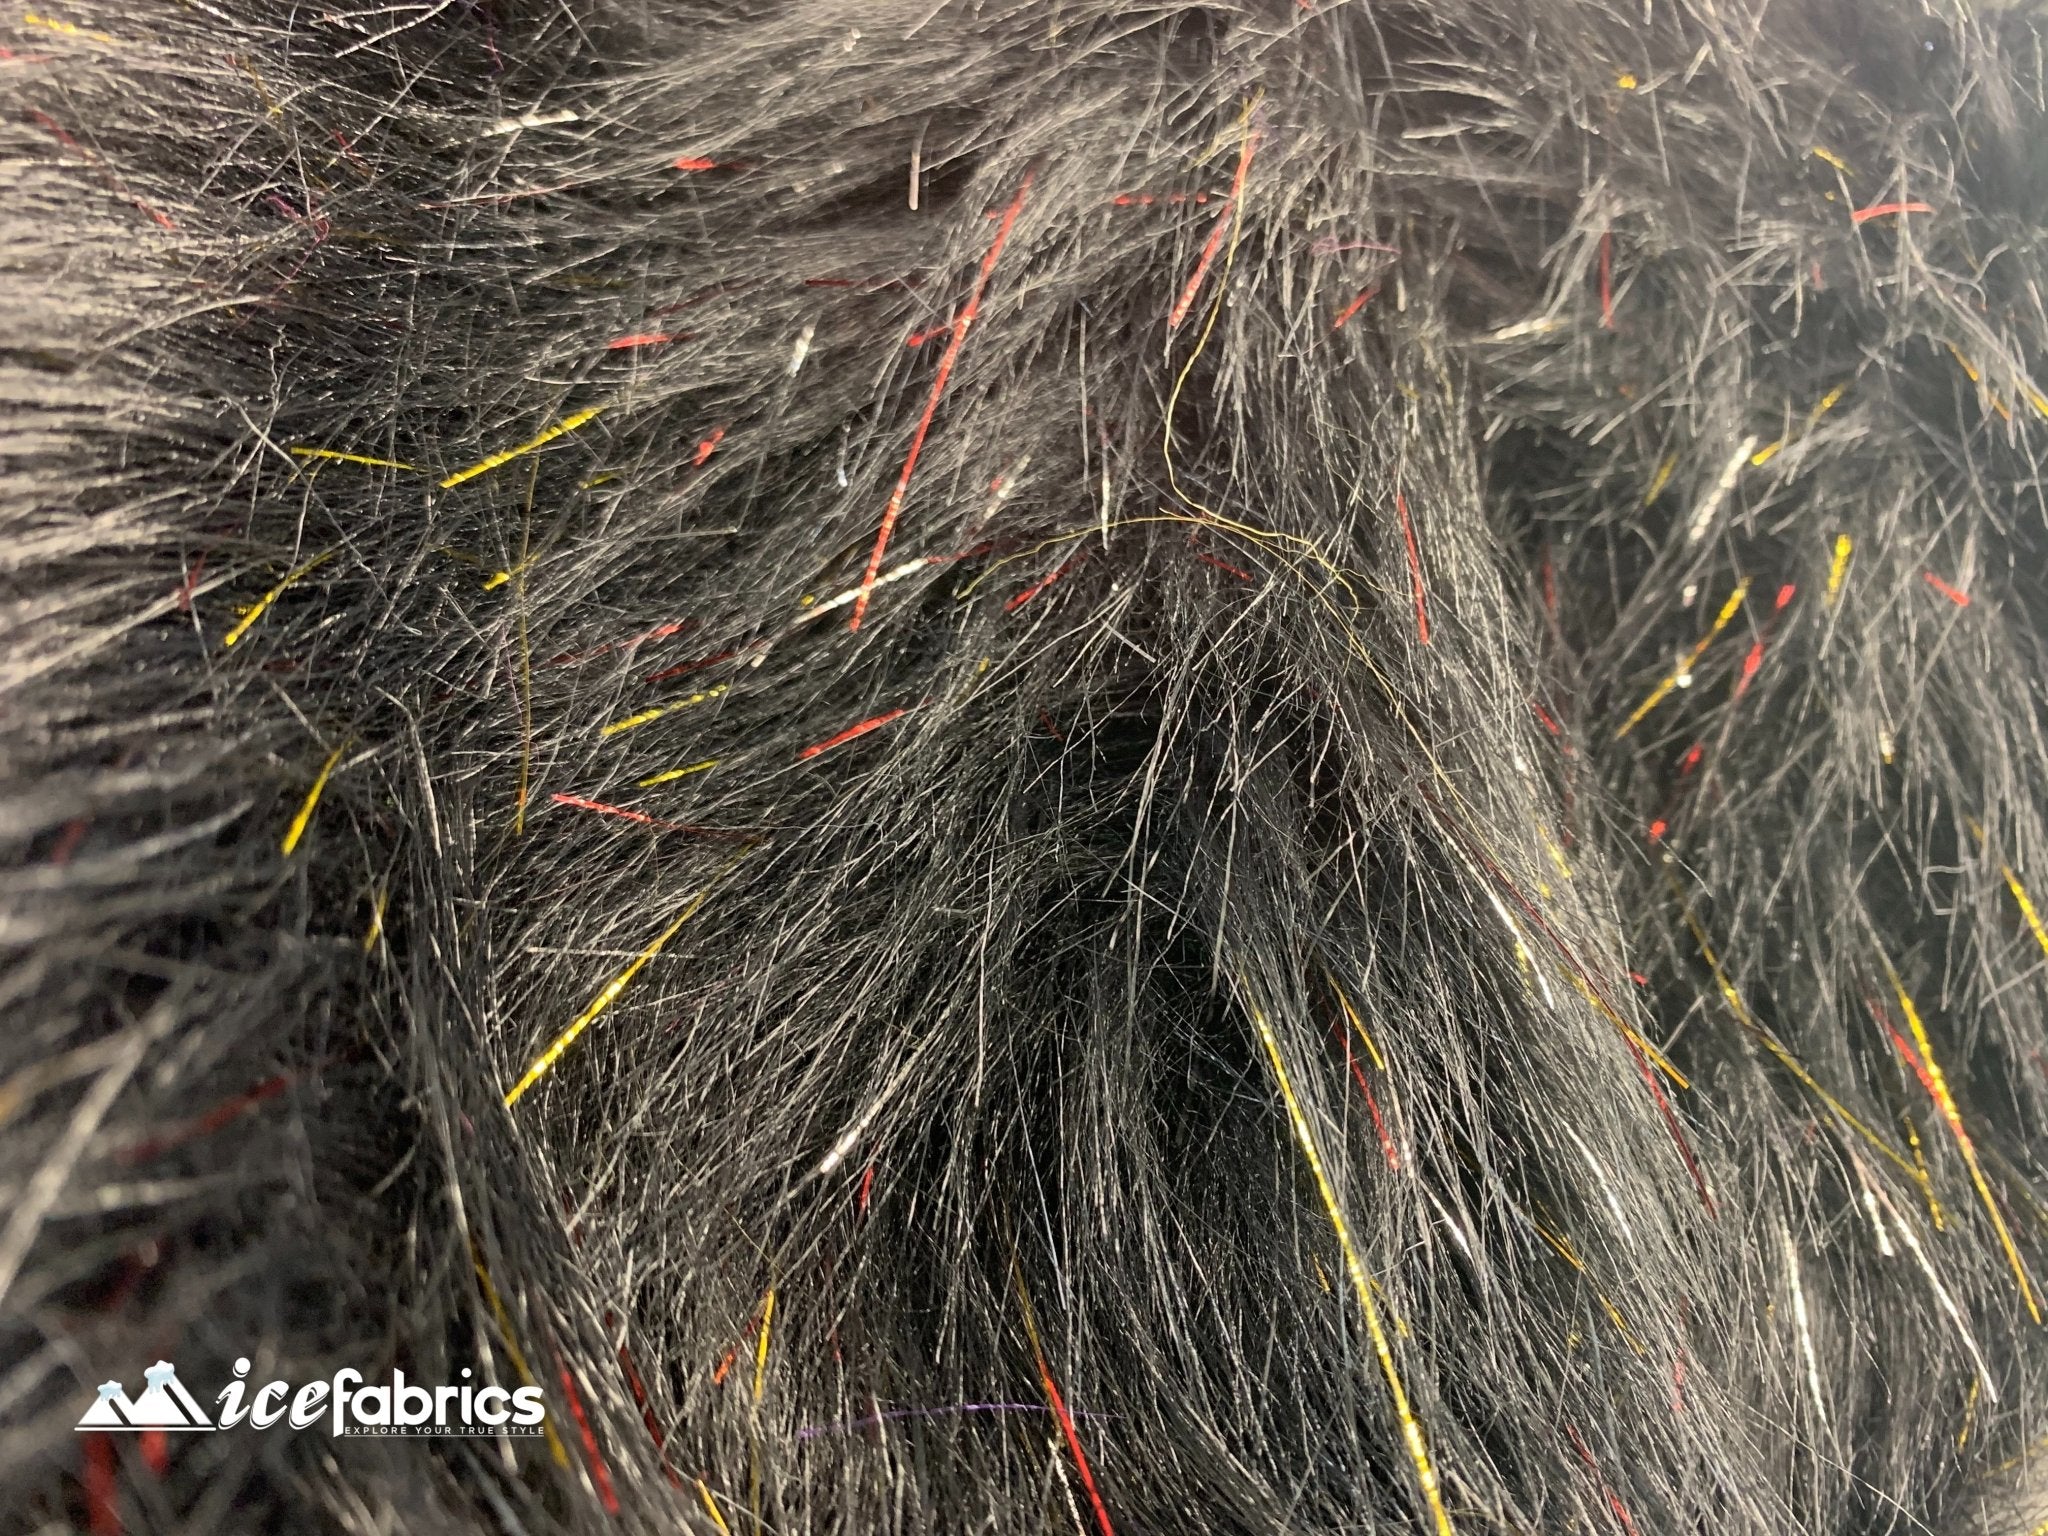 Tinsel Long Pile Mongolian Faux Fur Fabric By The Yard Fashion FabricICEFABRICICE FABRICSBlackBy The Yard (60 inches Wide)Tinsel Long Pile Mongolian Faux Fur Fabric By The Yard Fashion Fabric ICEFABRIC